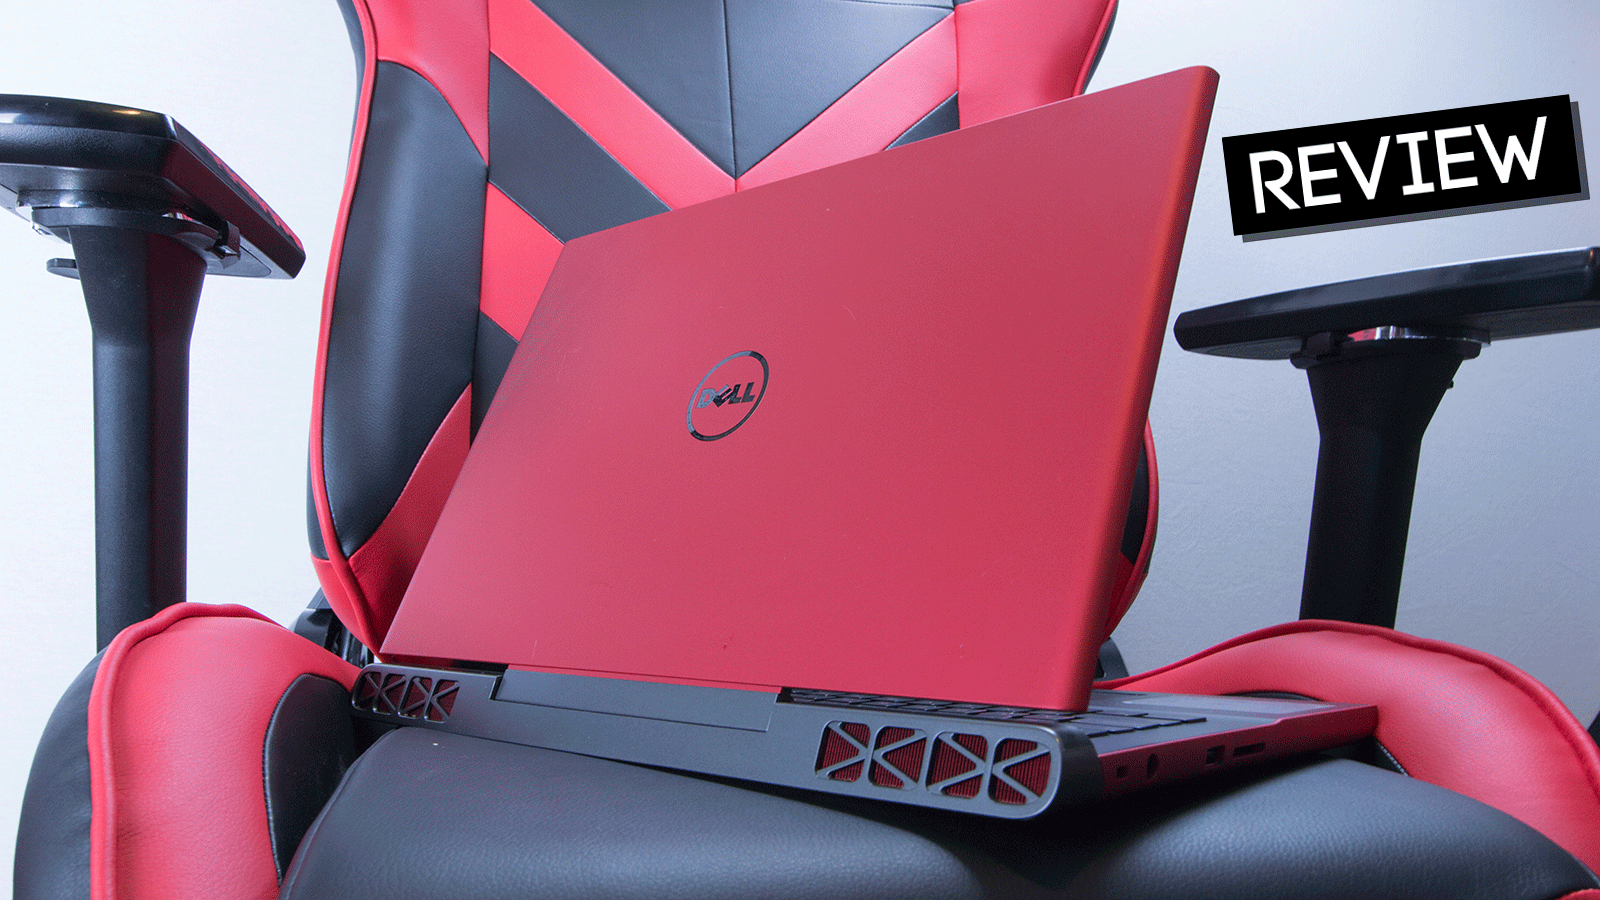 Dell Inspiron 15 7000 Gaming Laptop Review: It Plays Games